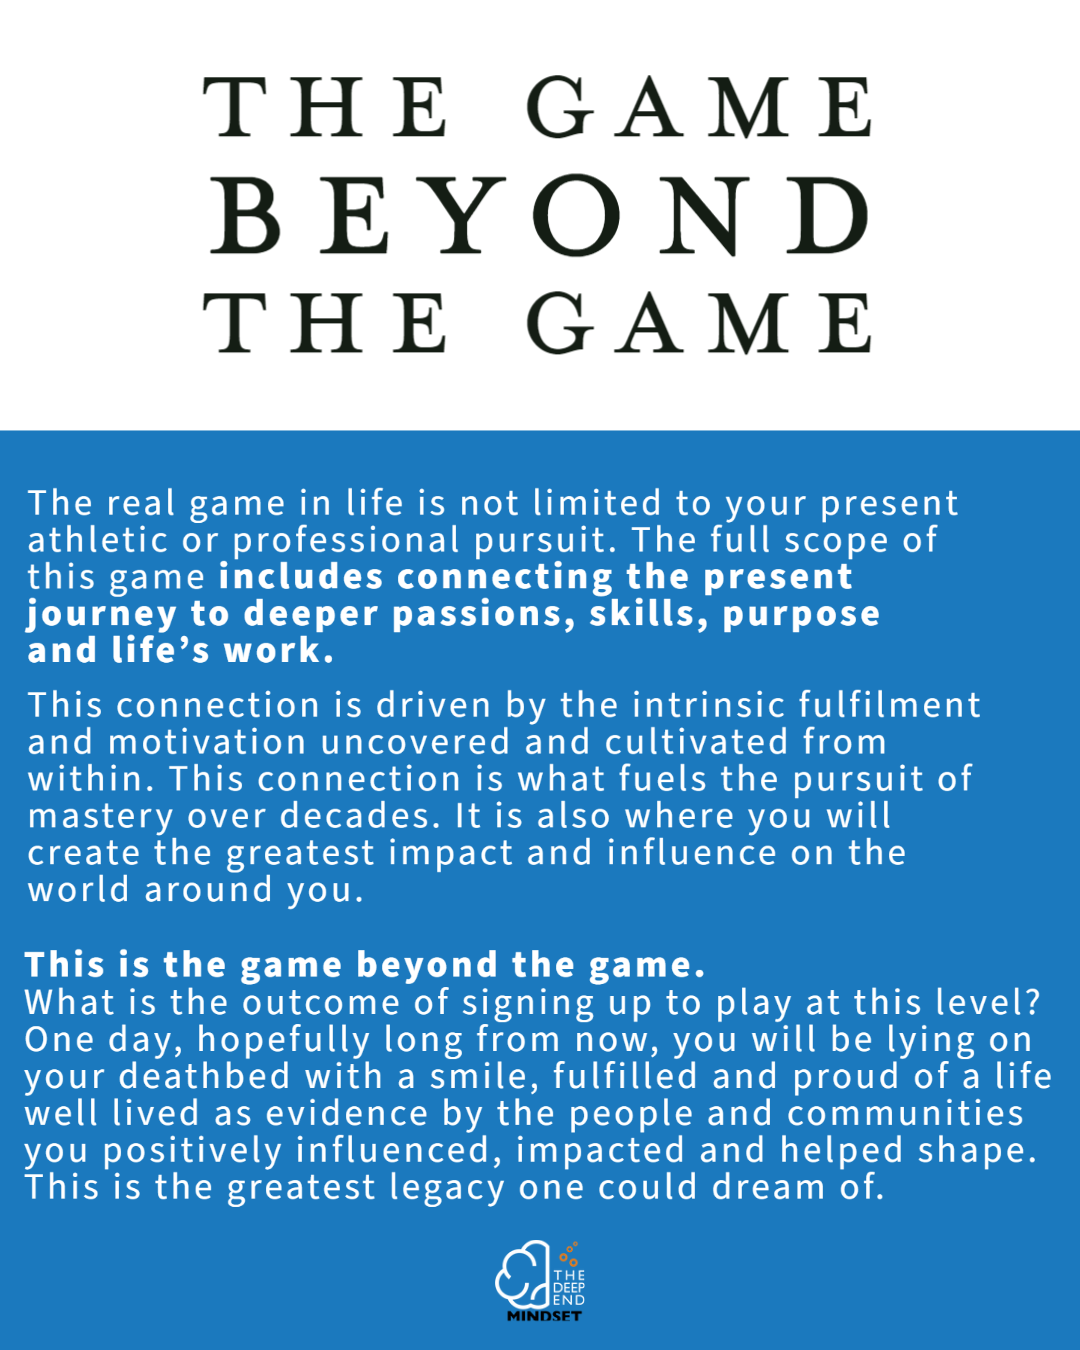 The Game Beyond the Game